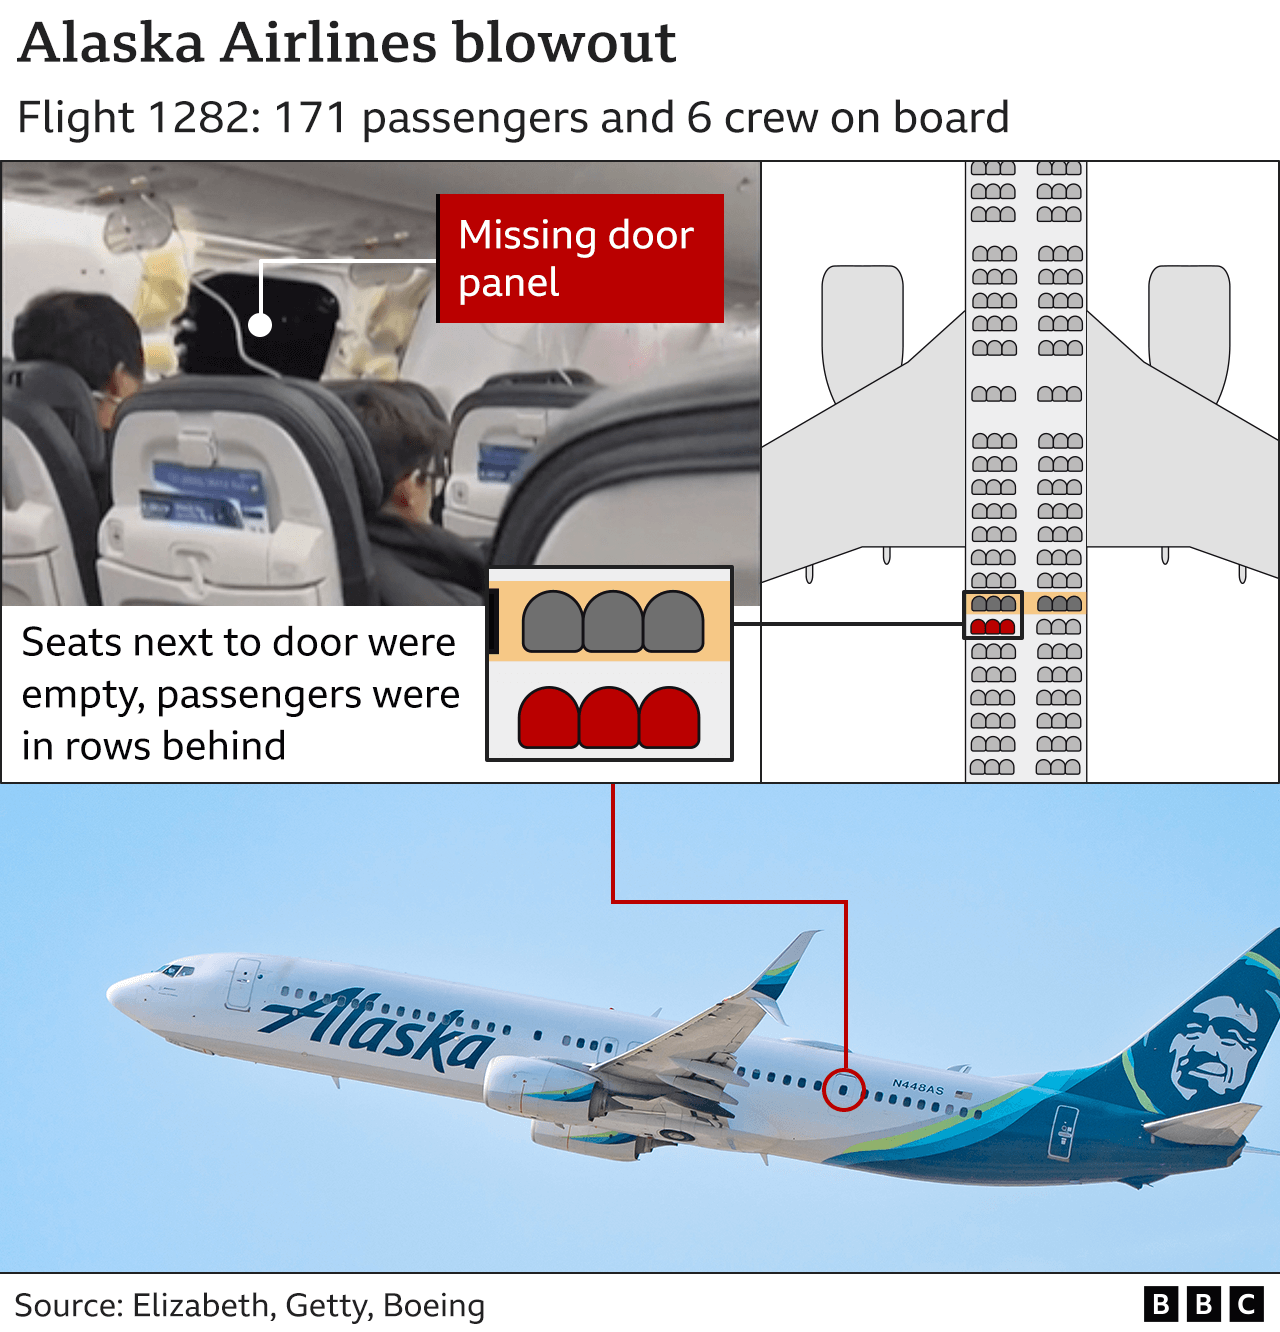 Diagram showing location of blowout on the Alaska Airlines plane